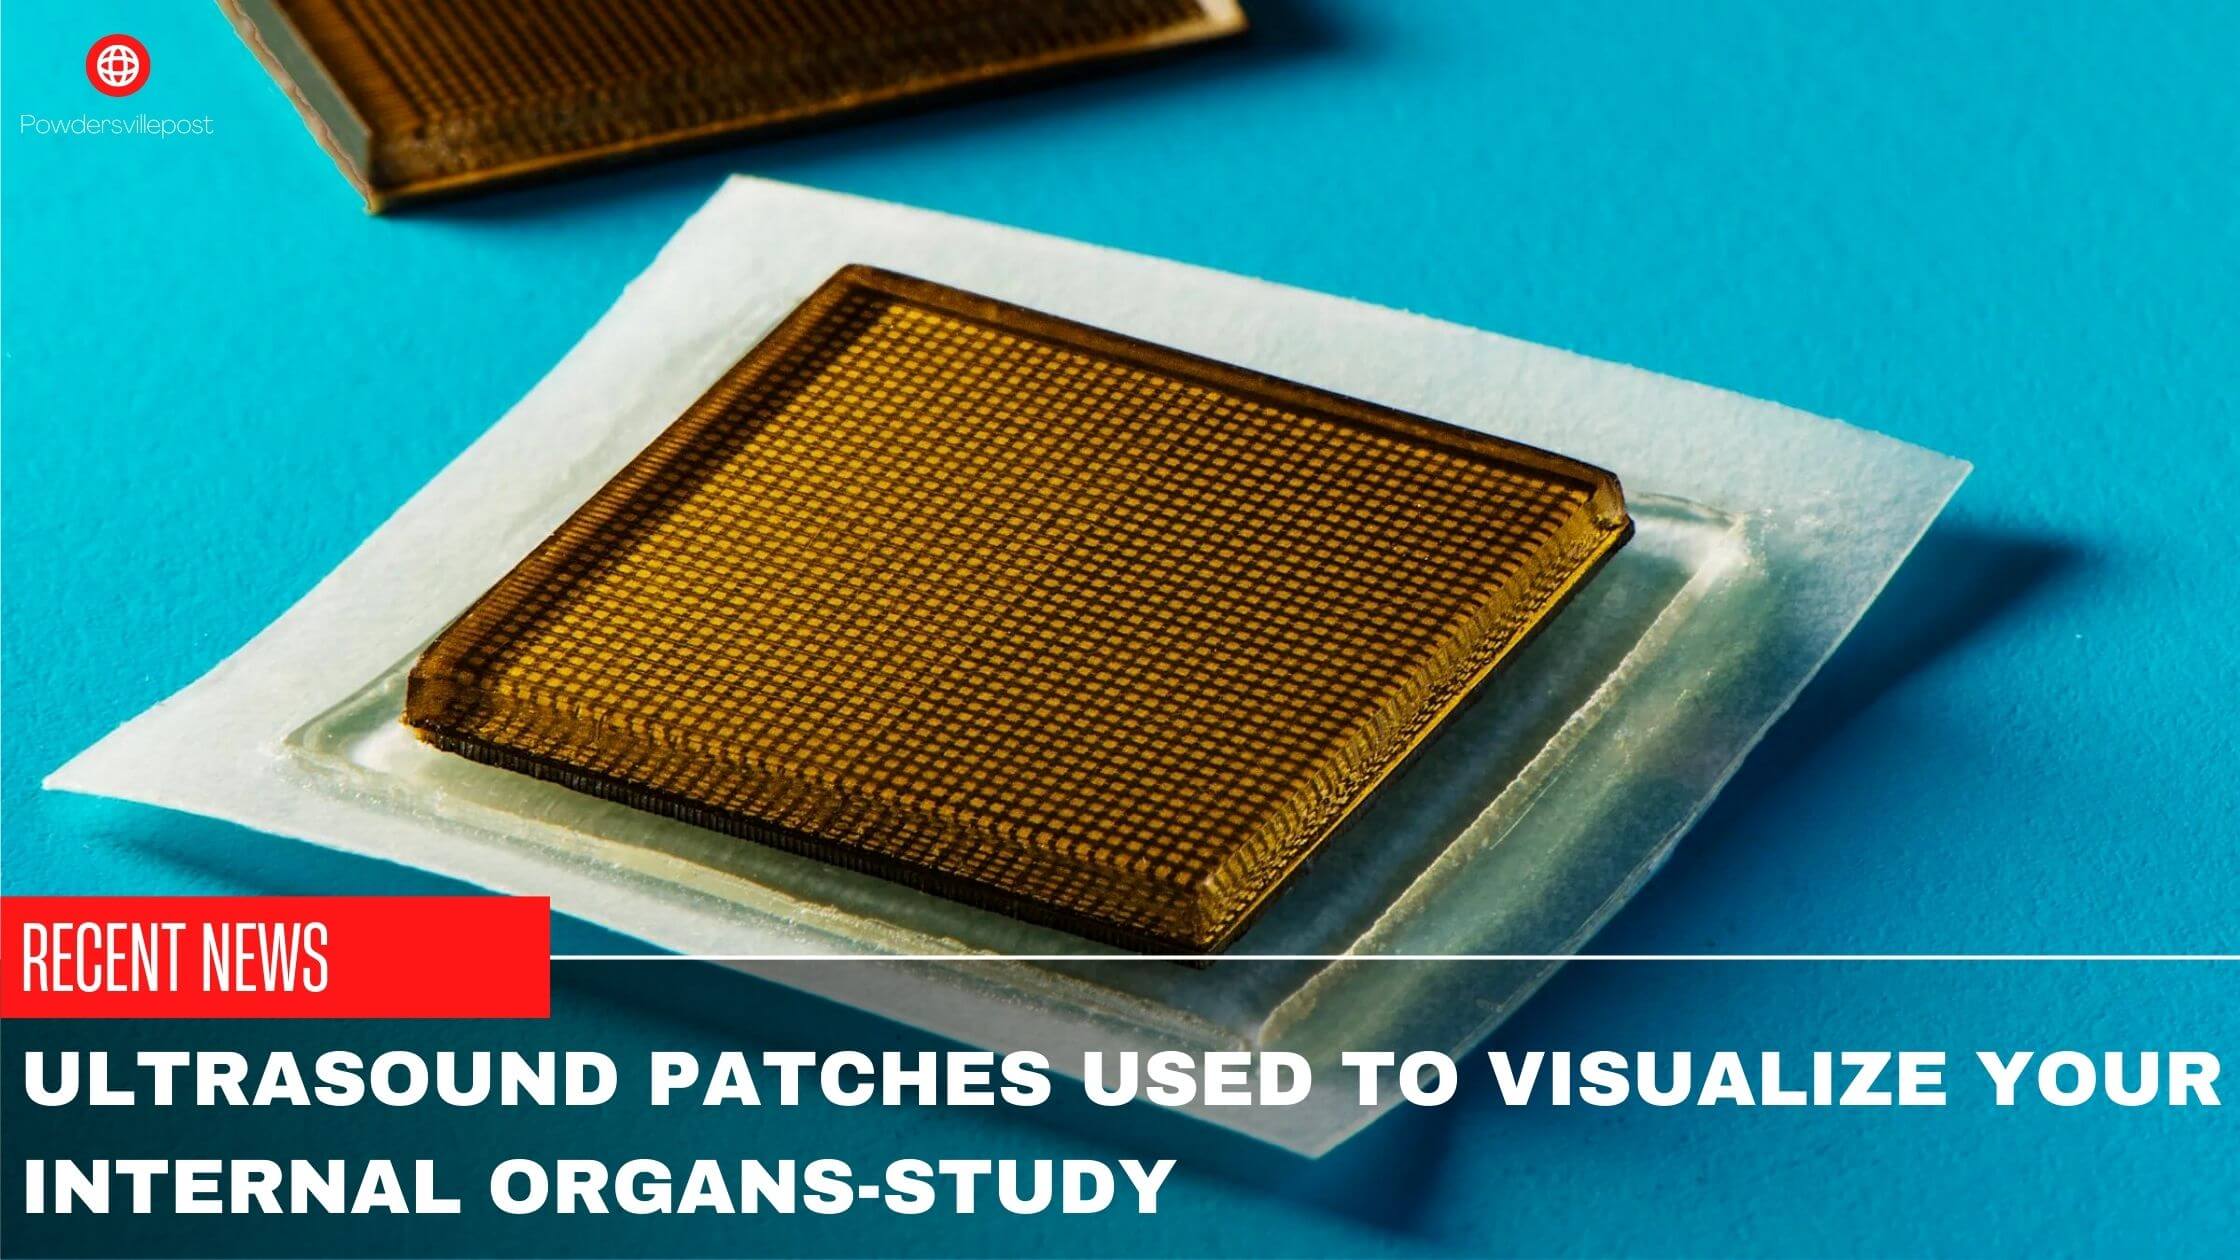 Ultrasound Patches Used To Visualize Your Internal Organs-Study